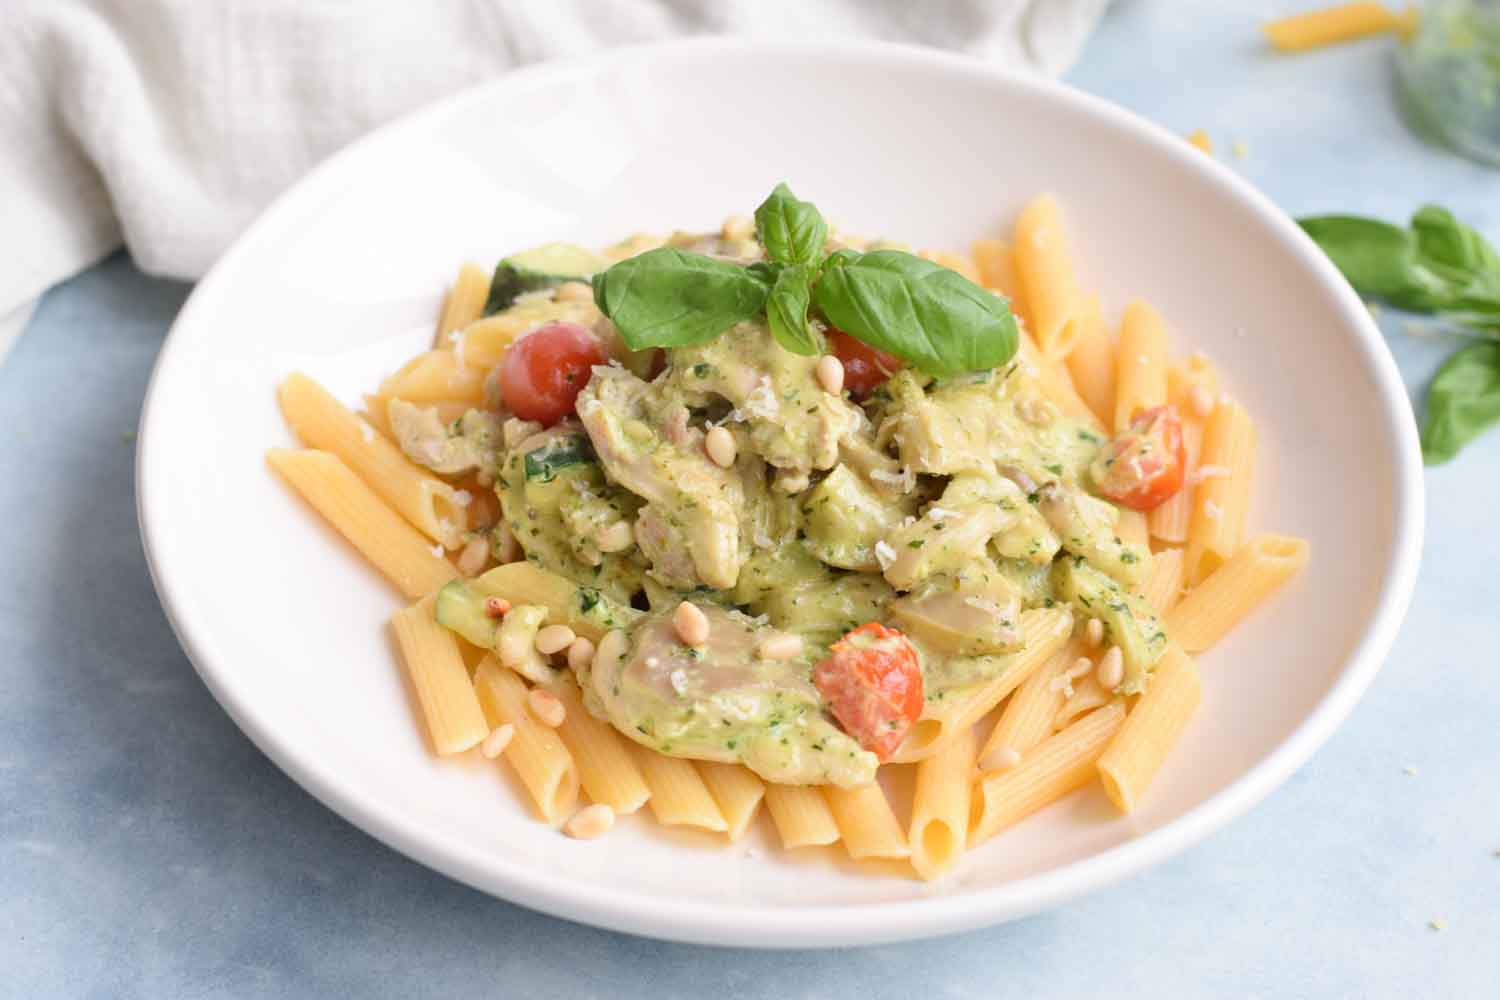 Low FODMAP creamy chicken pesto pasta with tomatoes and mushrooms on a plate